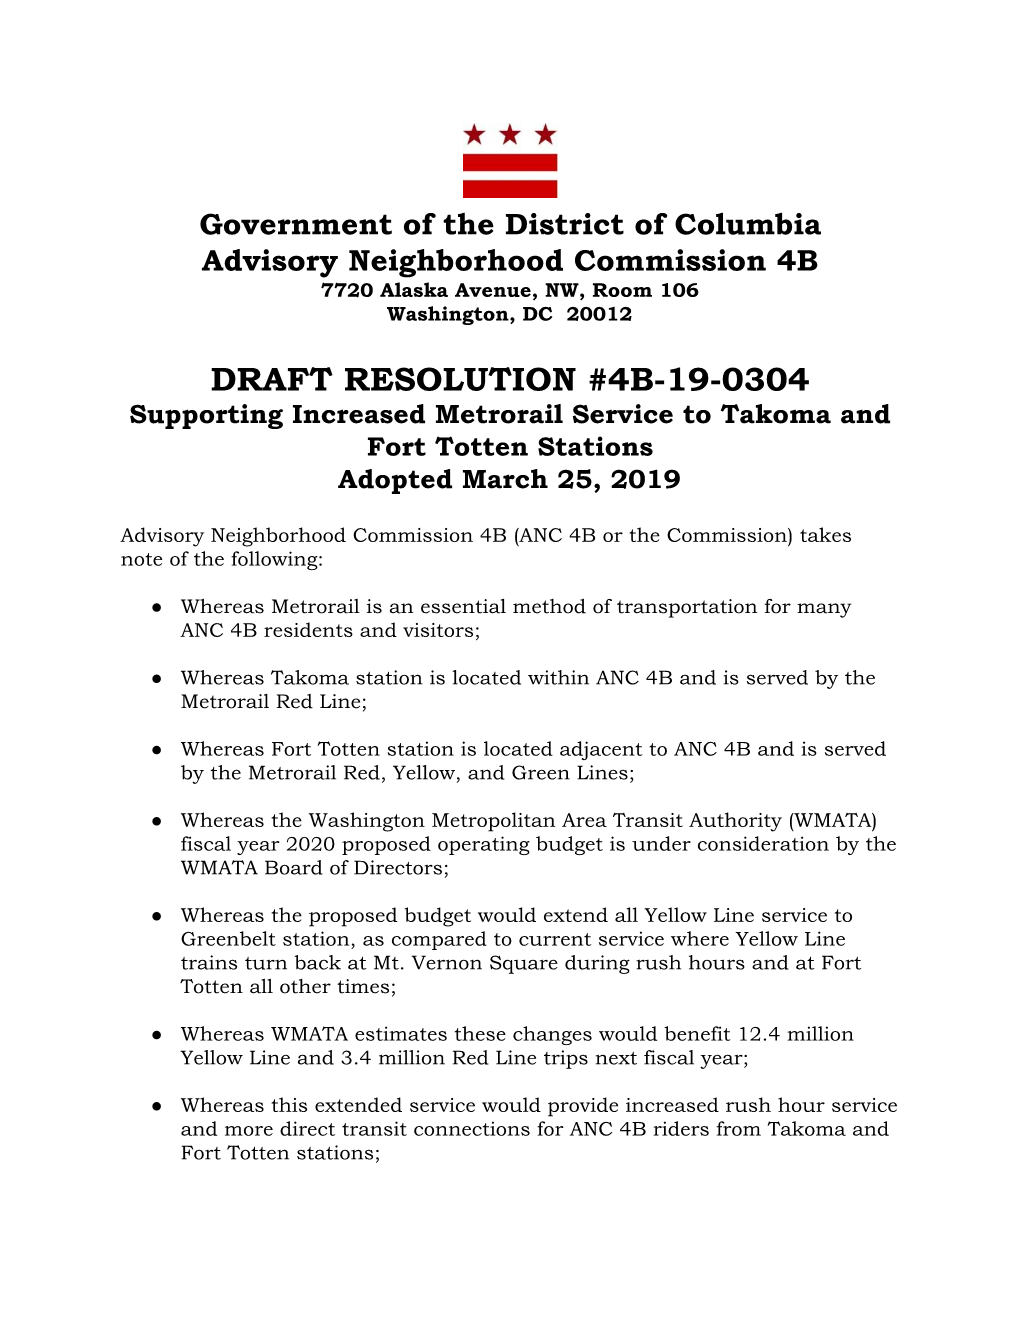 DRAFT RESOLUTION #4B-19-0304 Supporting Increased Metrorail Service to Takoma and Fort Totten Stations Adopted March 25, 2019